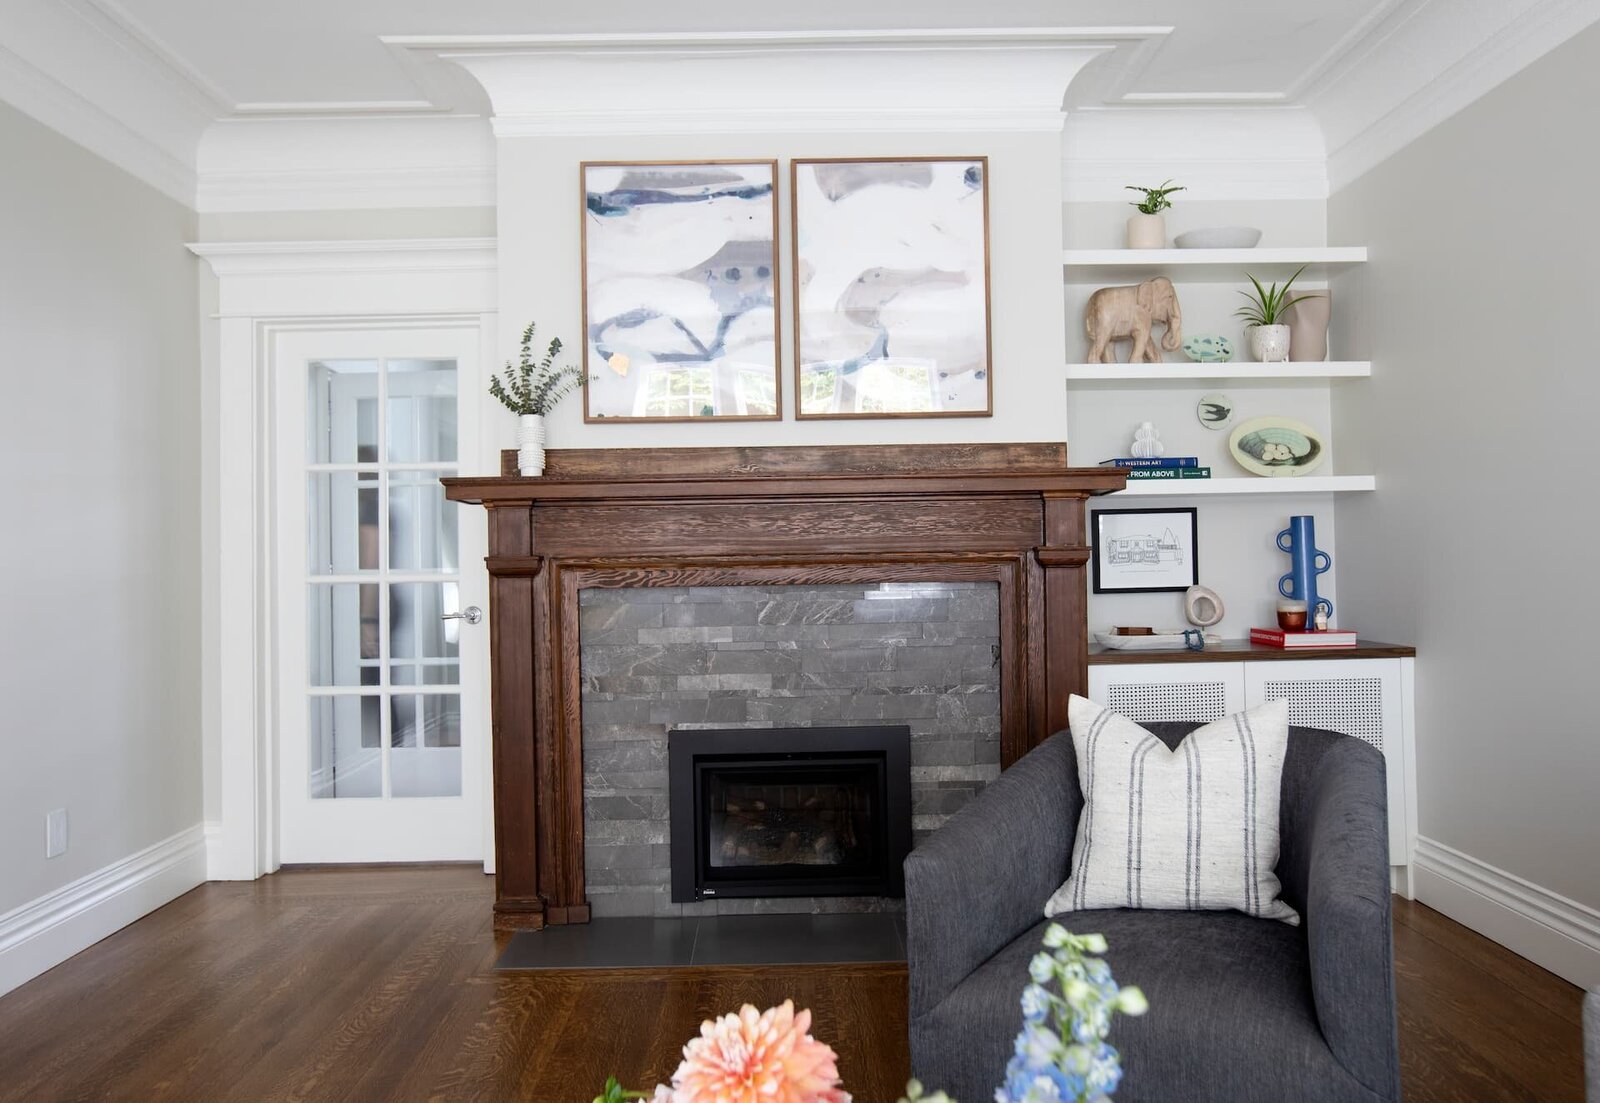 Granville Street l Living Room l Diptych Art over Fireplace with Custom Built-in